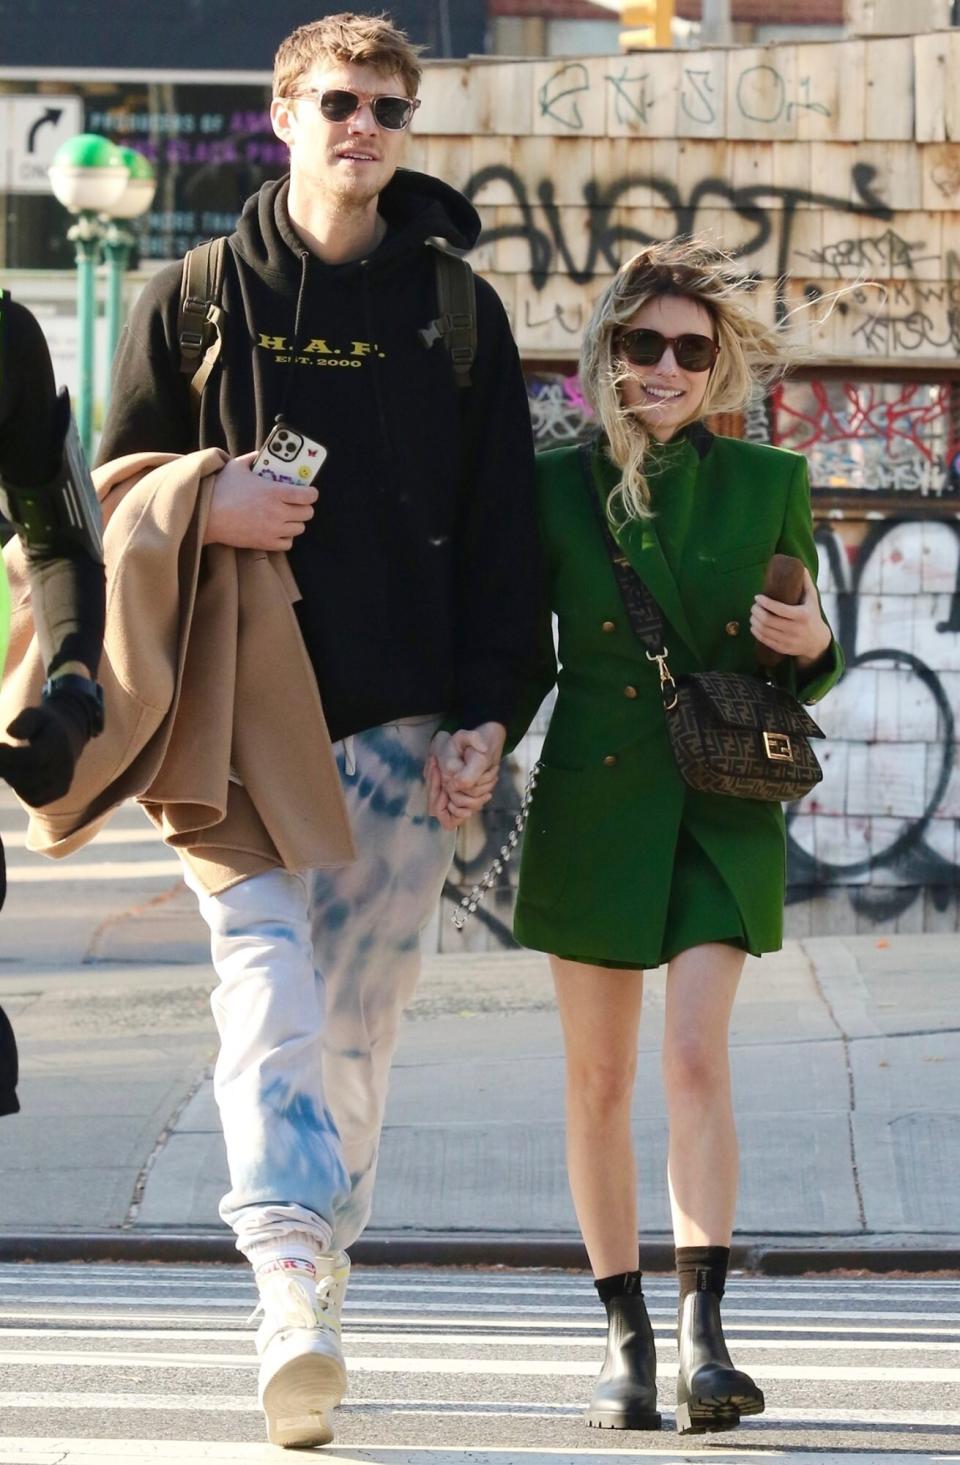 *EXCLUSIVE* - Actress Emma Roberts and her boyfriend Cody John are all smiles as they hold hands and kiss during a romantic PDA-filled moment in Manhattan’s Downtown area